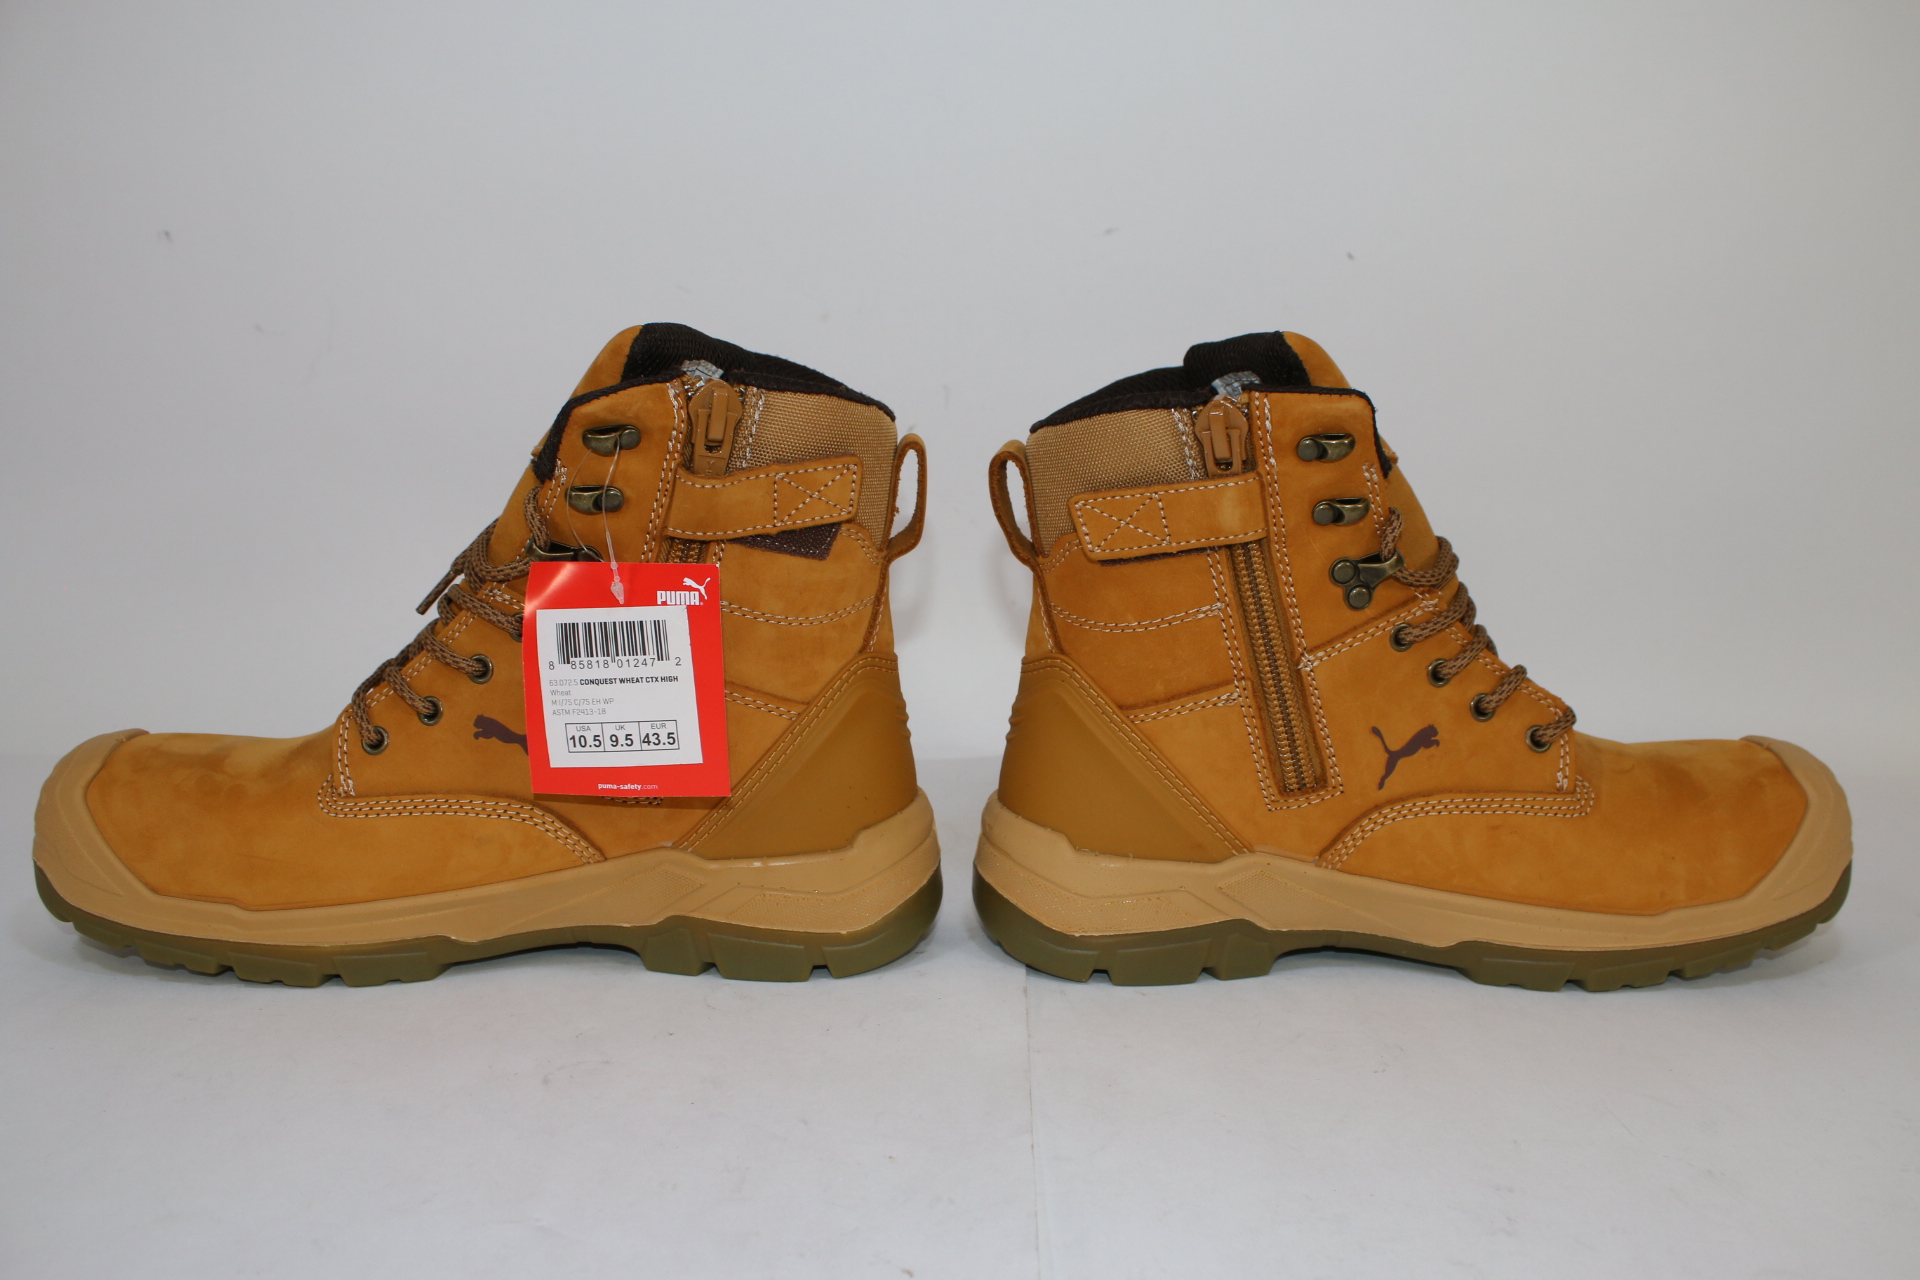 PUMA Conquest Wheat CTX HIGH Safety Men's Shoes ASTM EH WP SR 2472 Size 